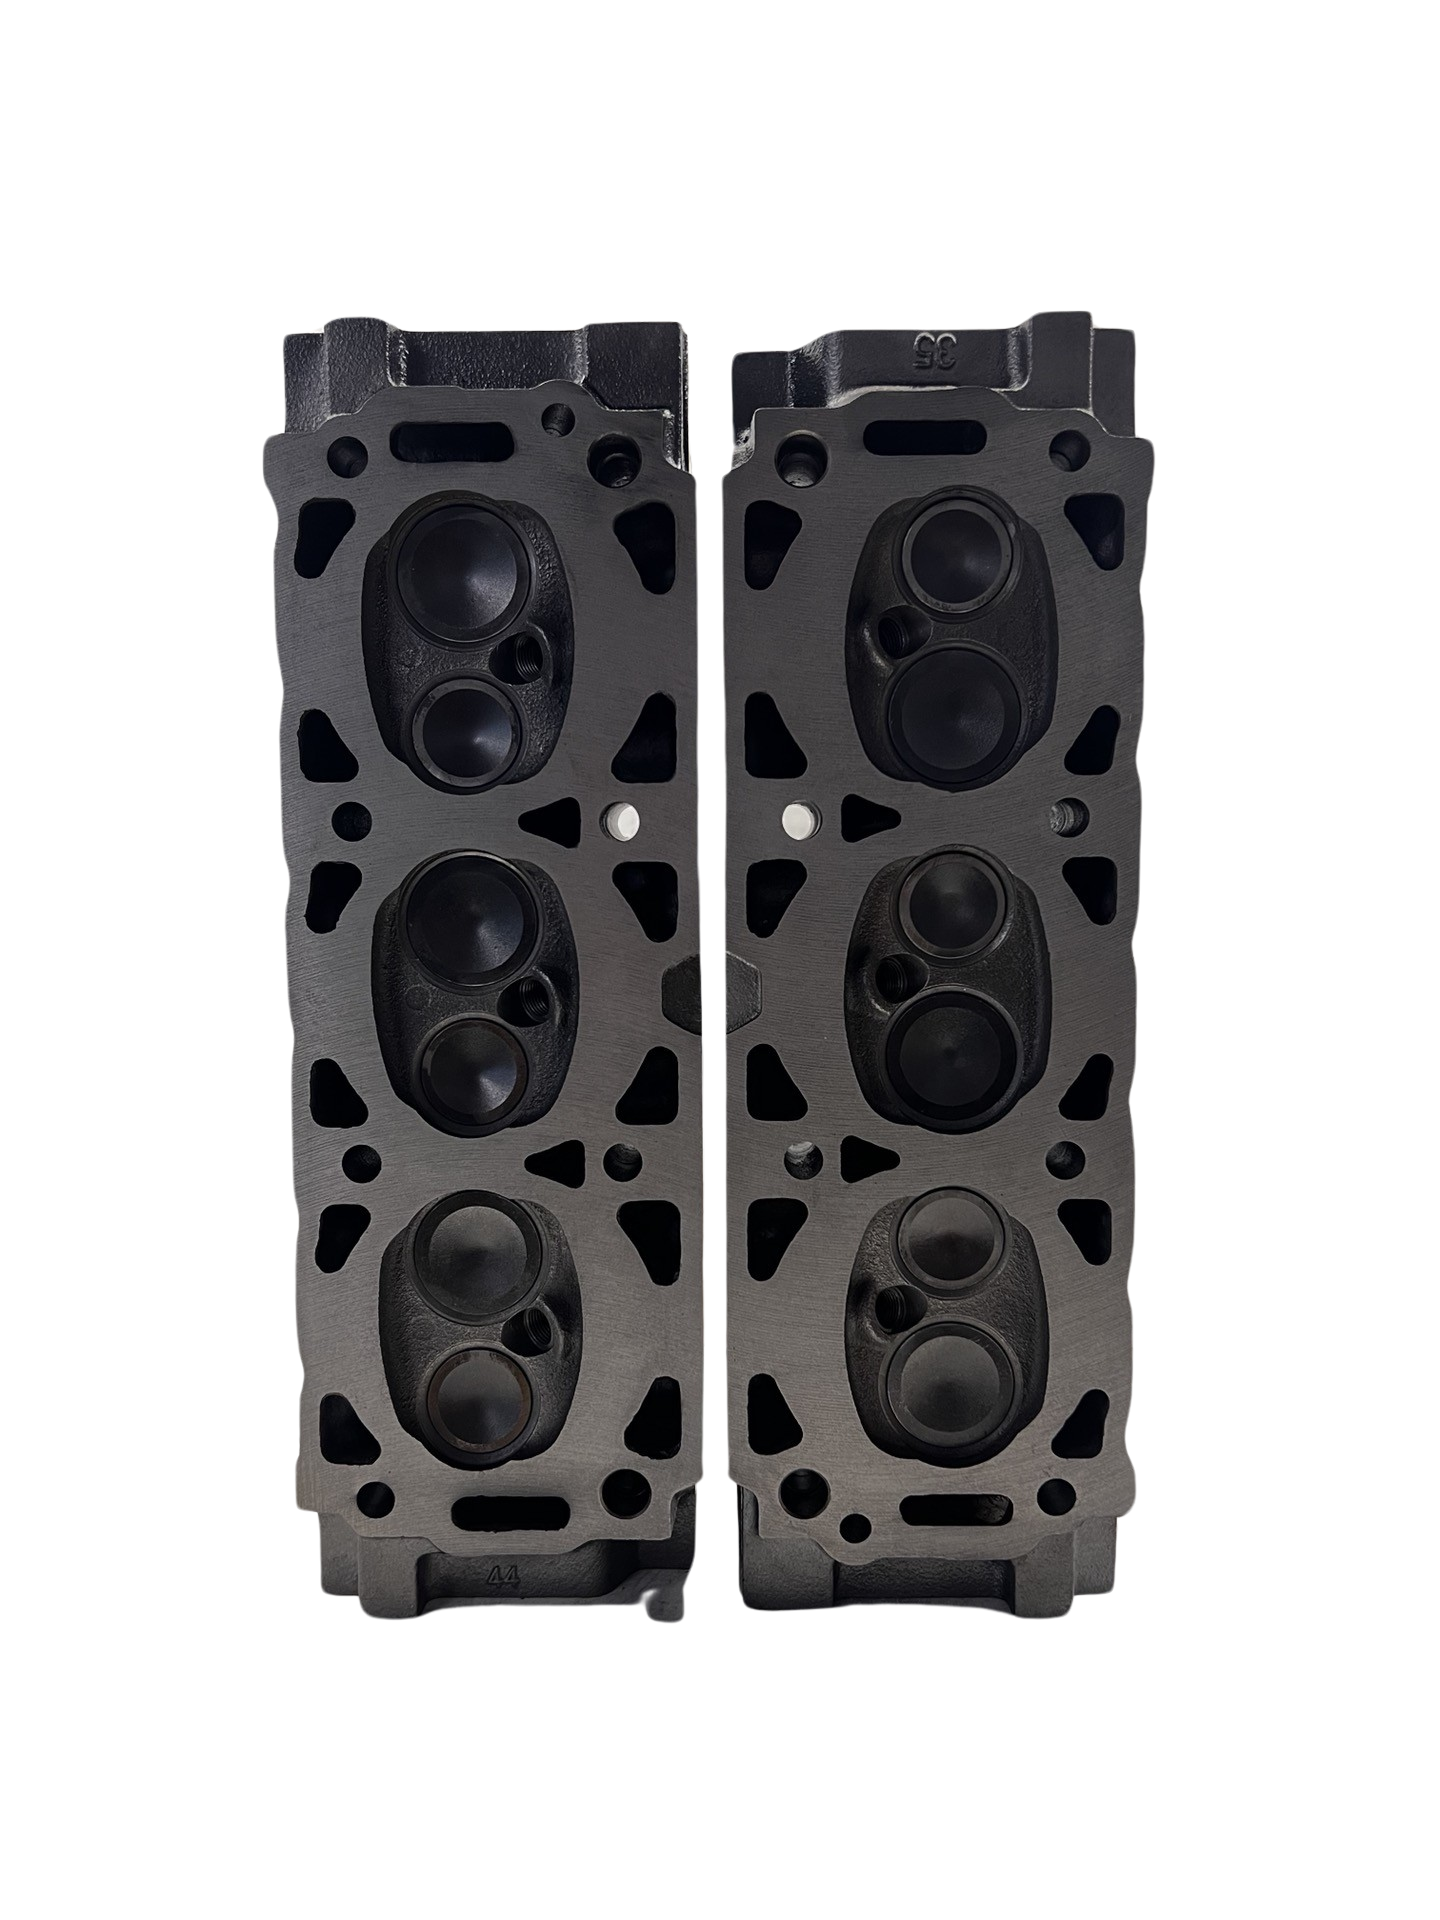 Bottom of cylinder heads Ford 3.0L OHV V6 Ranger/ Taurus 8mm (SOLD IN PAIR)